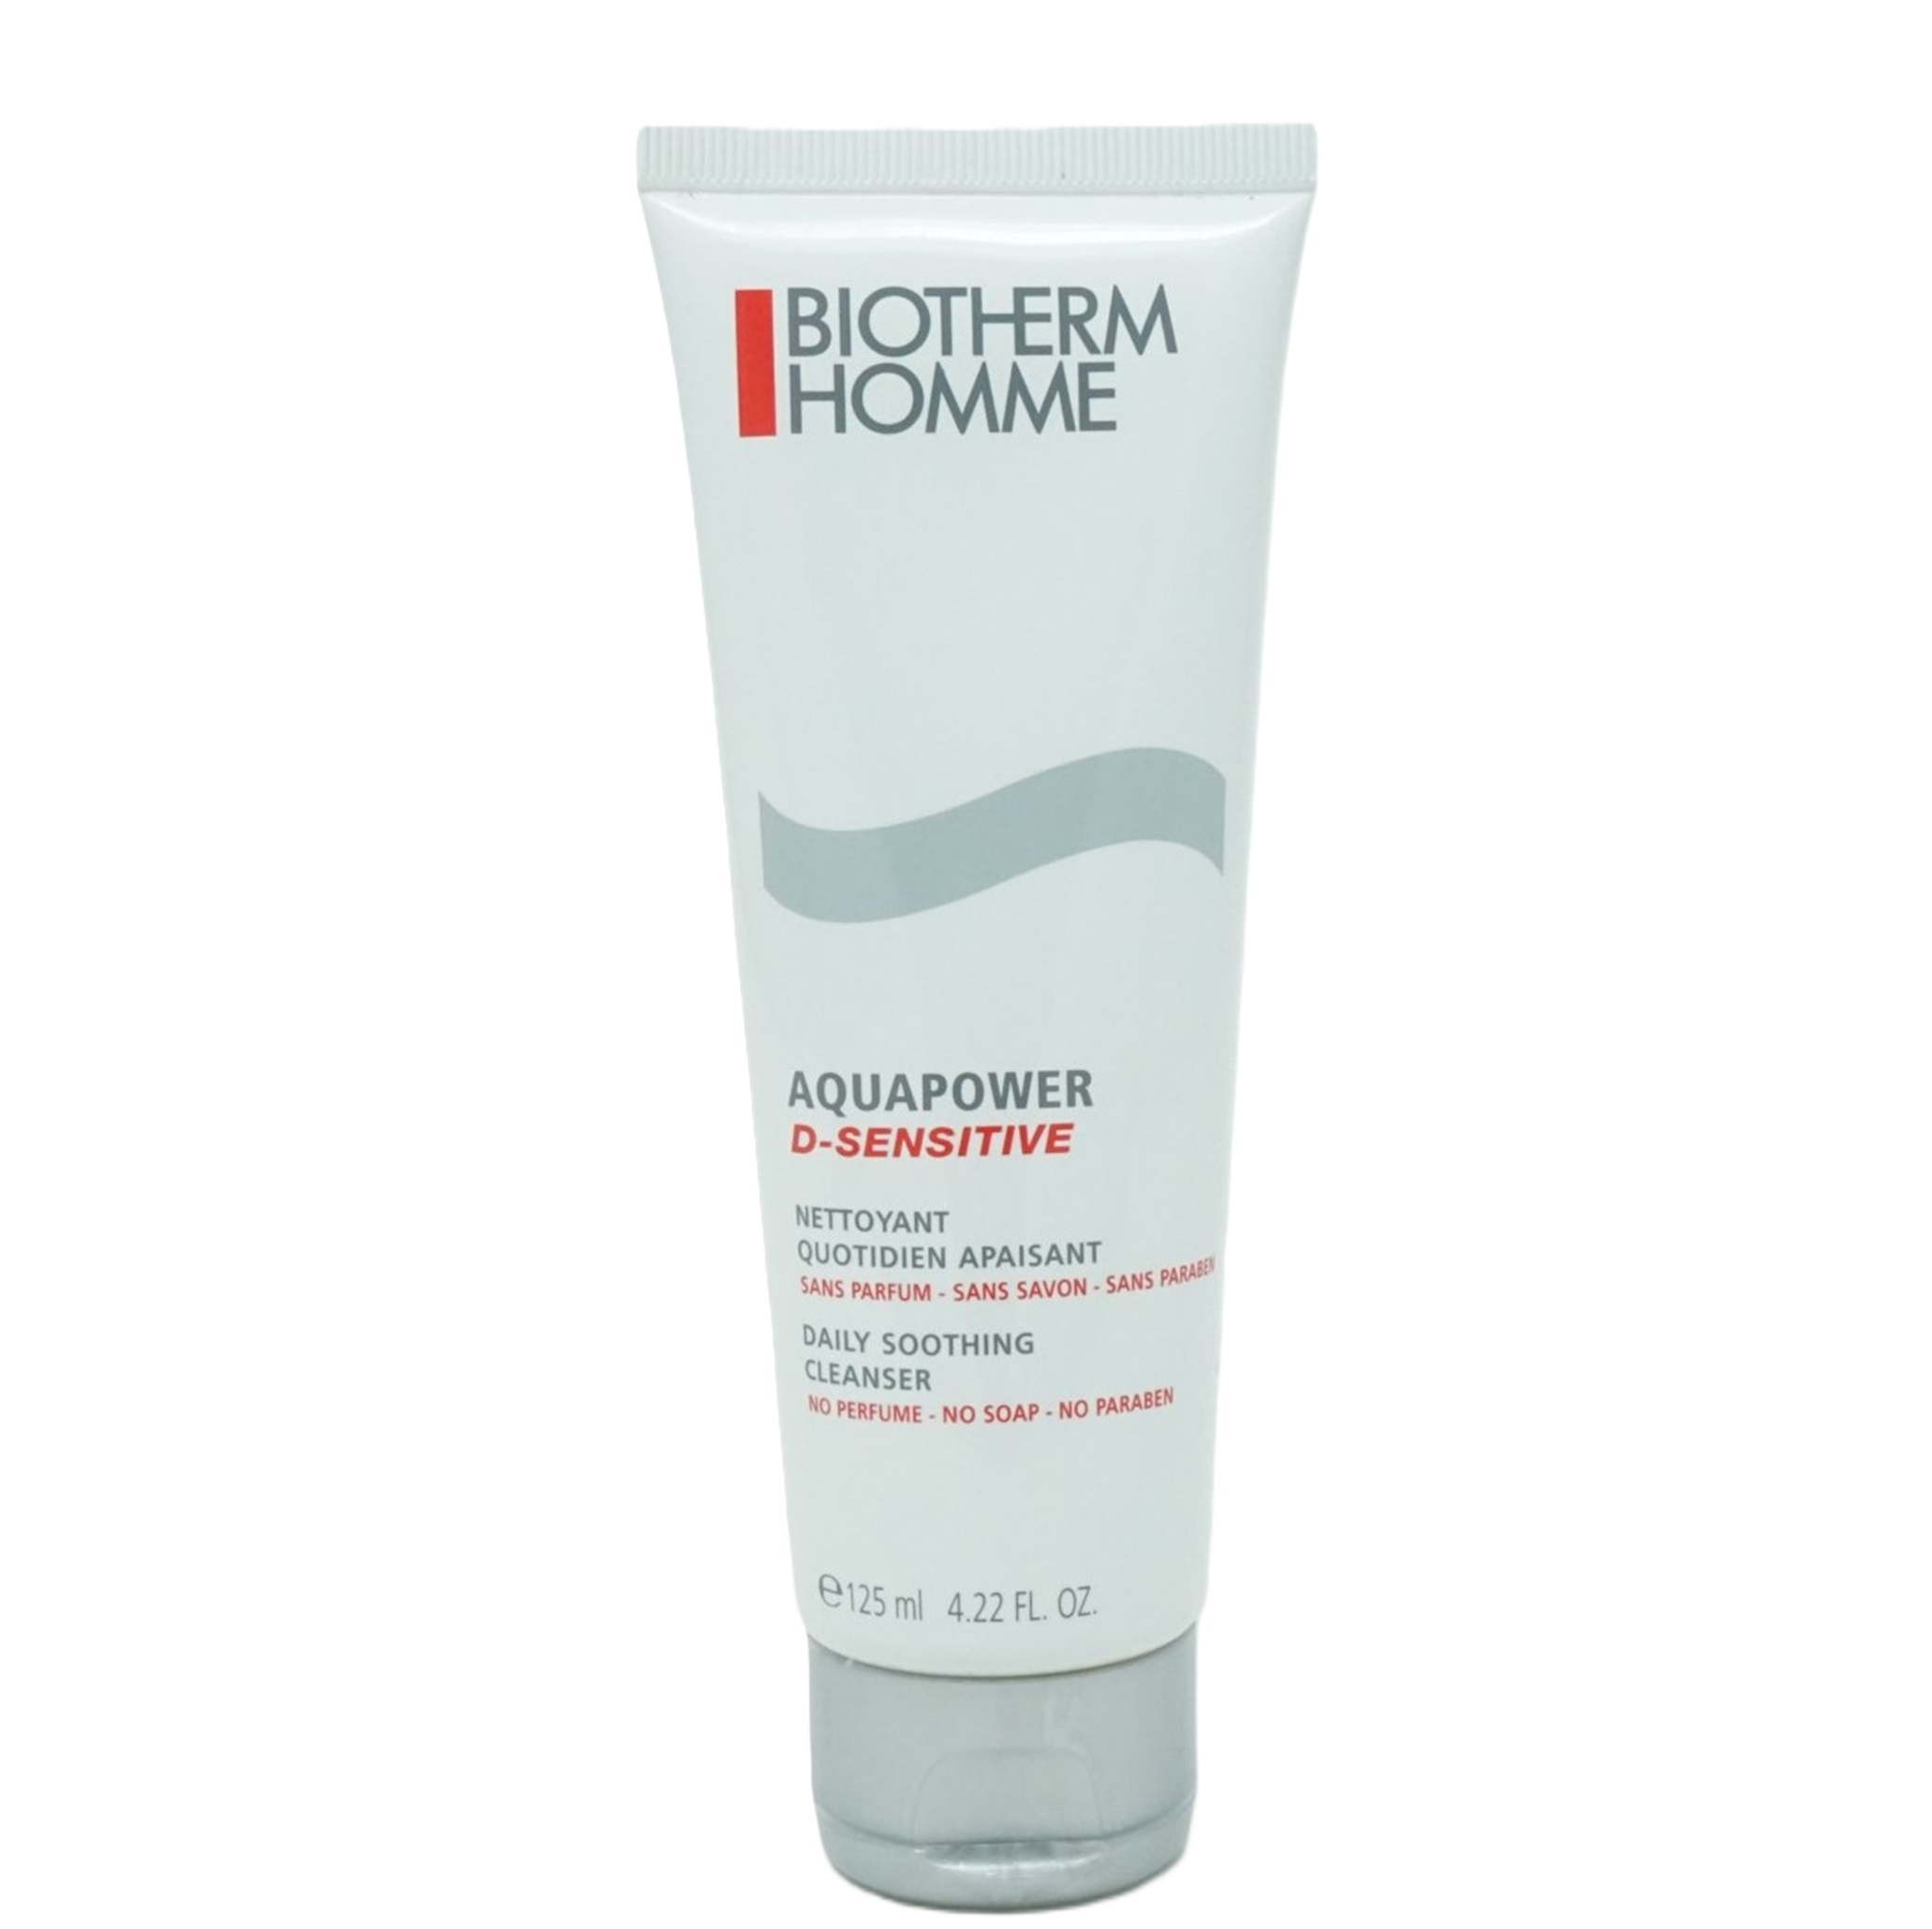 Biotherm Homme AQUAPOWER D-Sensitive Daily Shoothing Cleanser 125ml